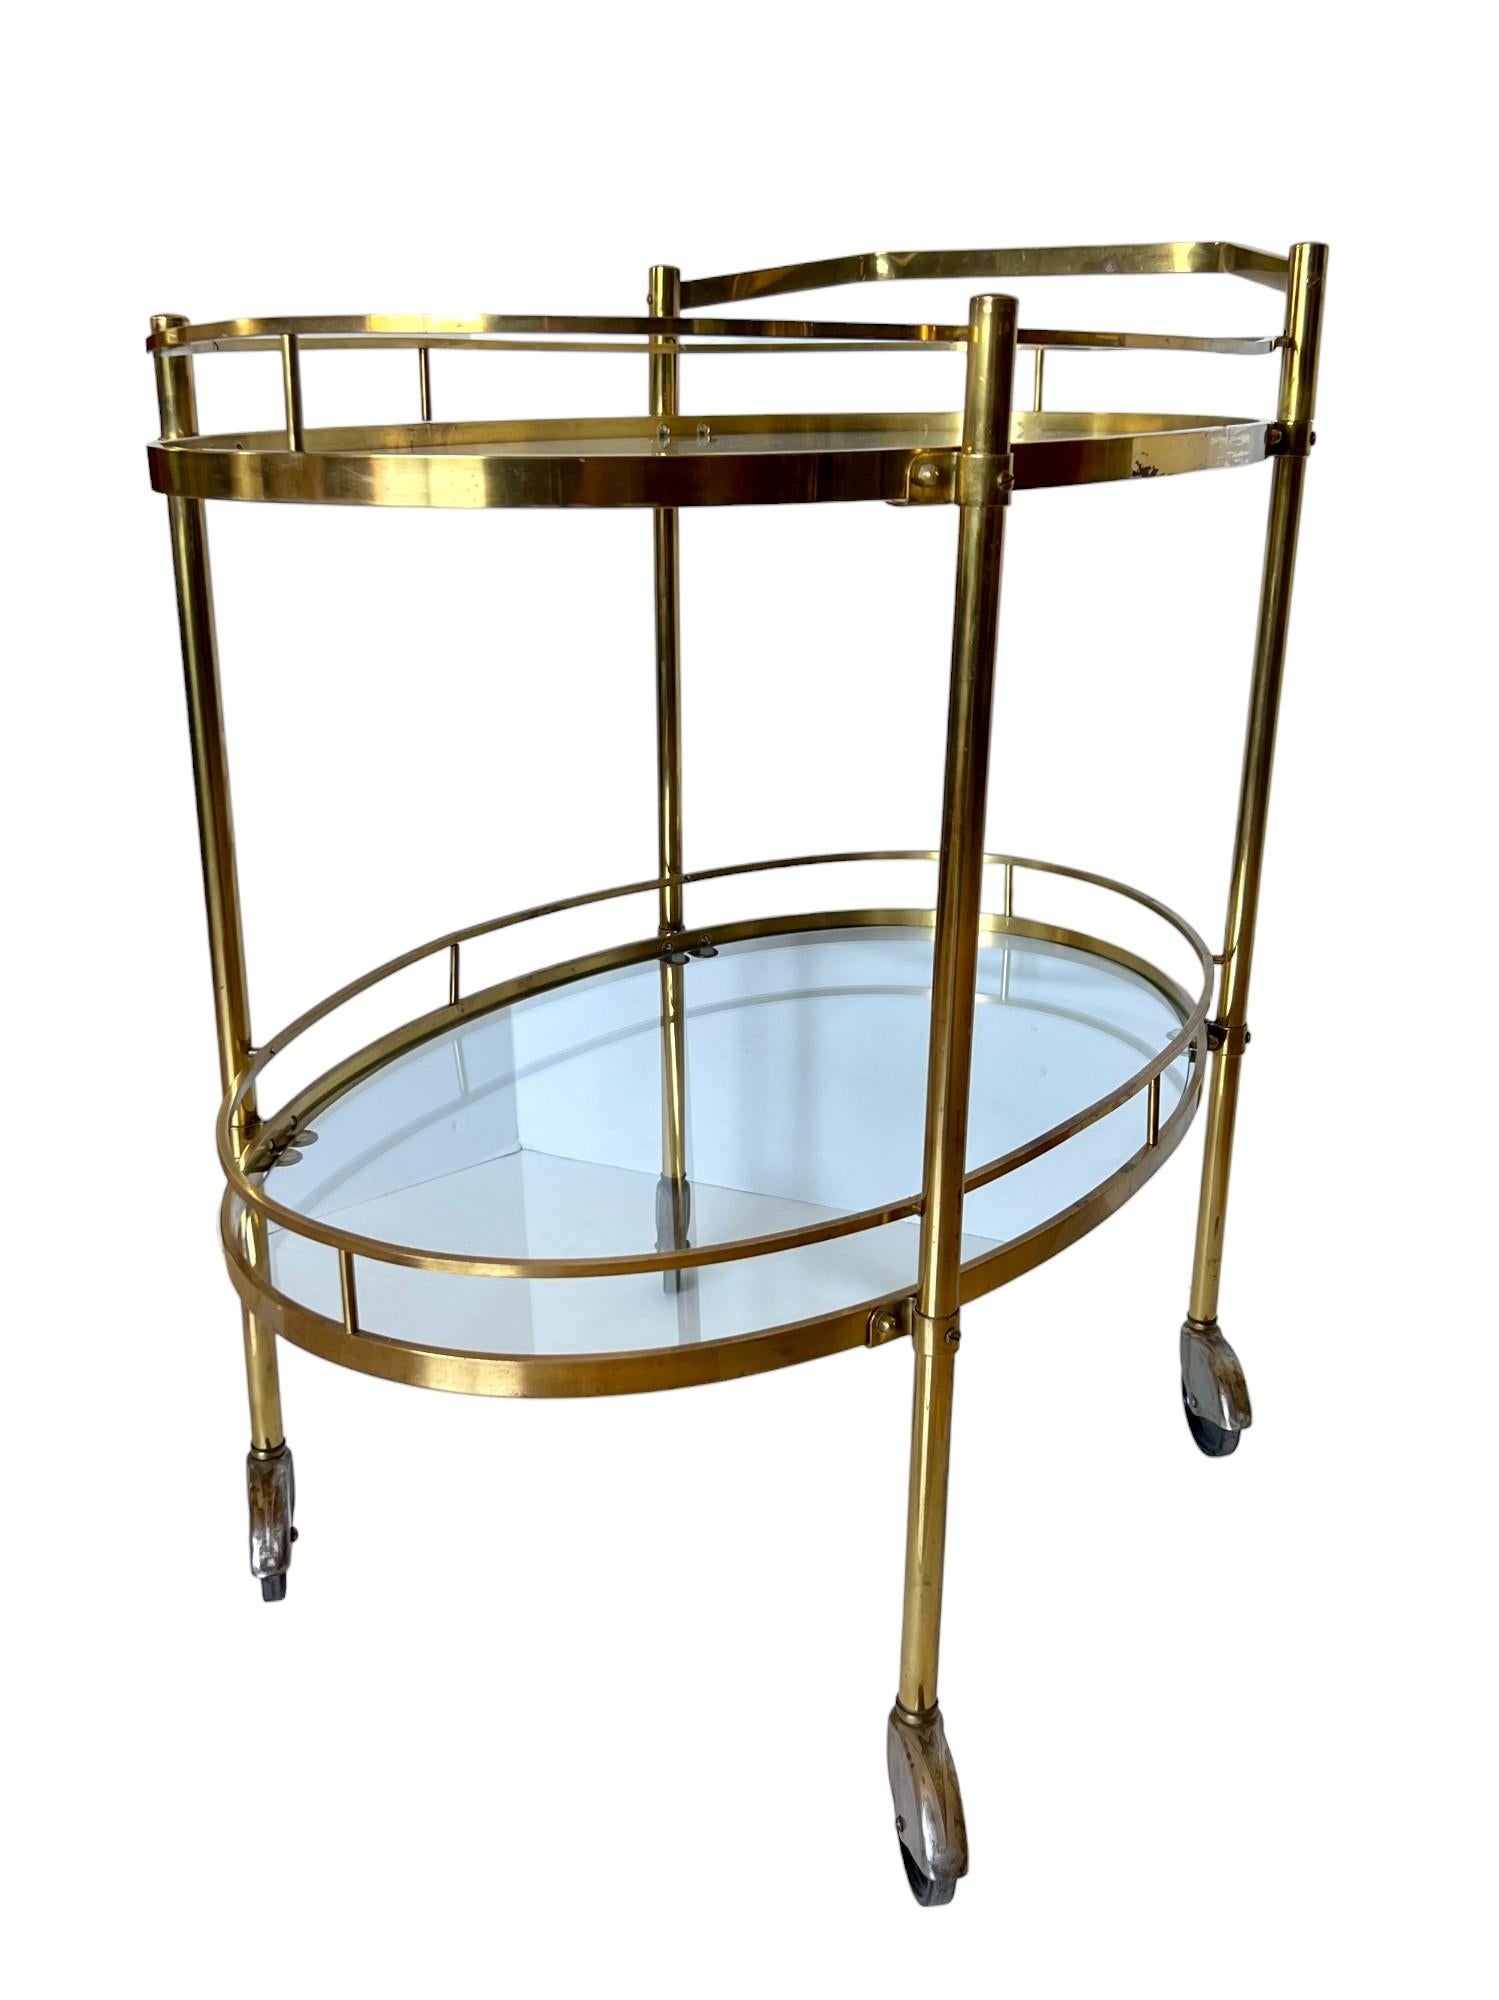 20th Century Mid-Century Modern Brass and Glass Bar Cart, 1960s For Sale